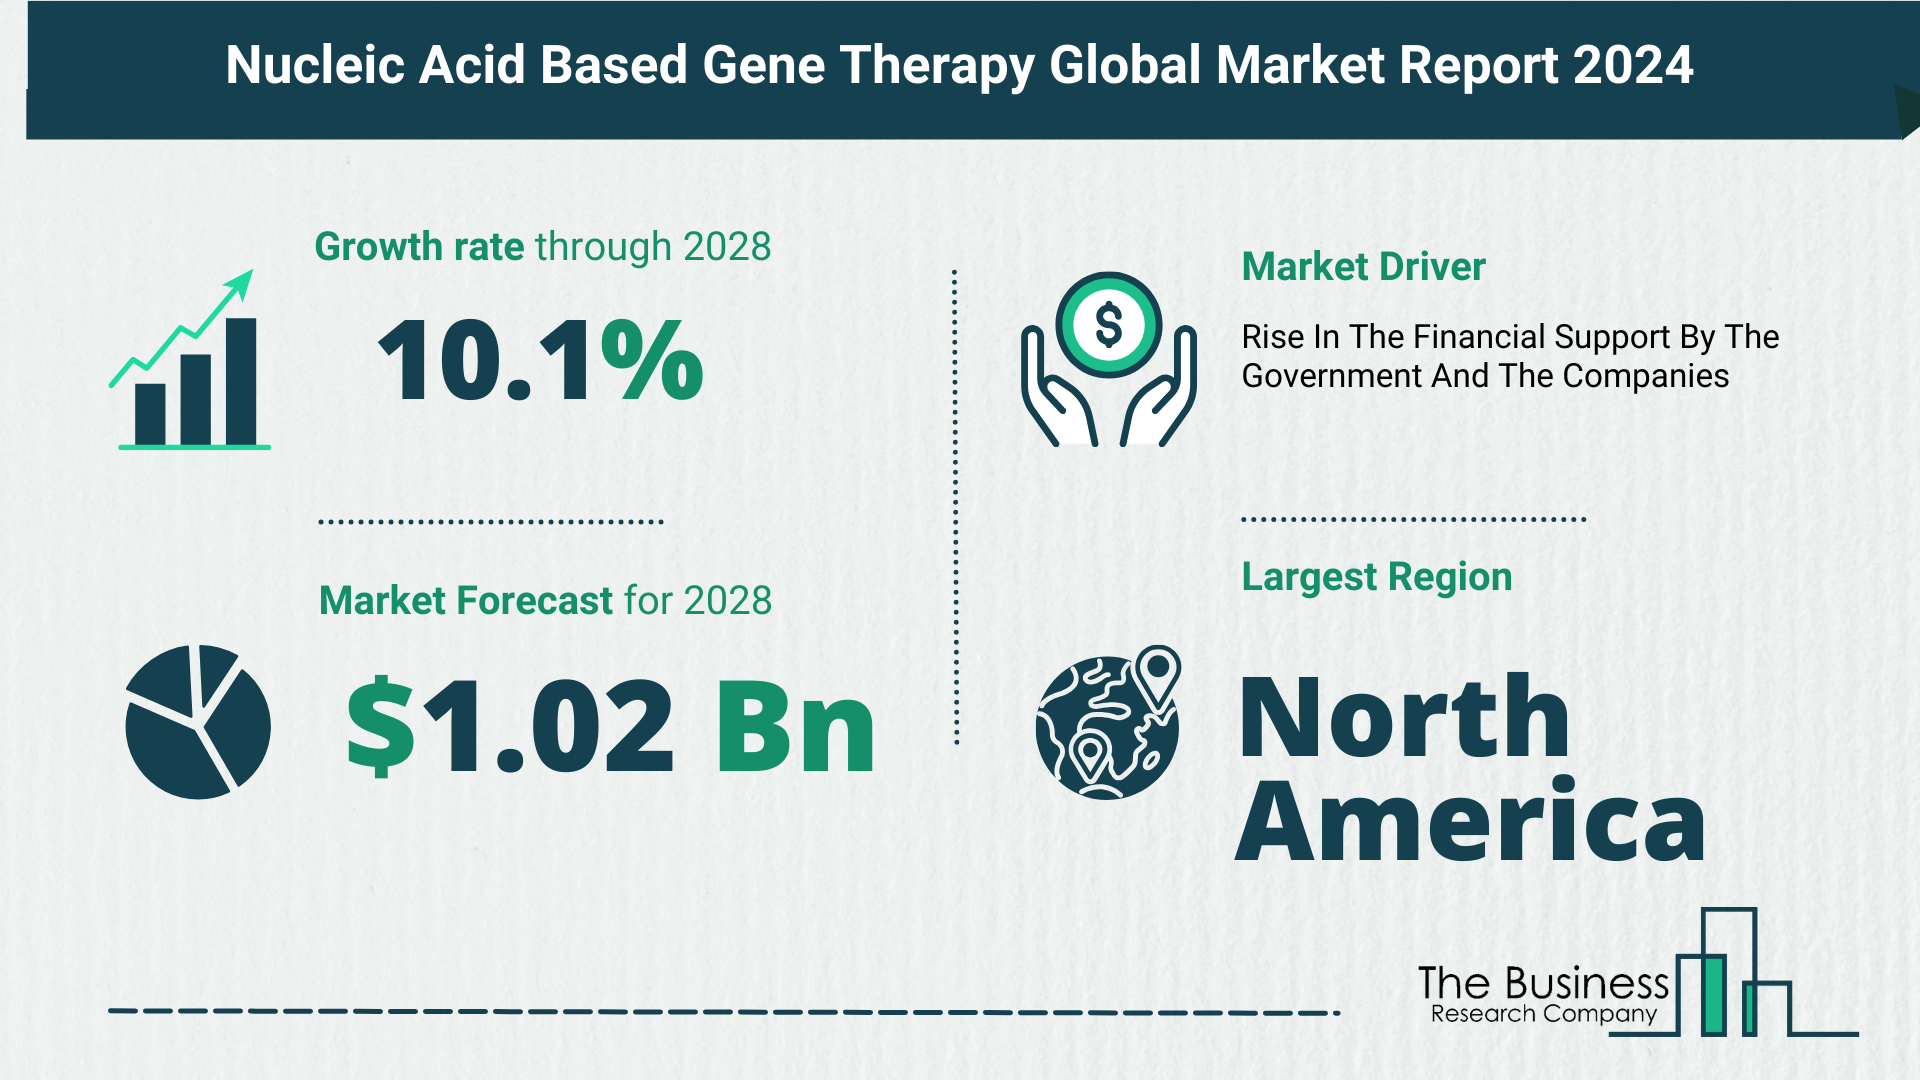 Understand How The Nucleic Acid Based Gene Therapy Market Is Poised To Grow Through 2024-2033